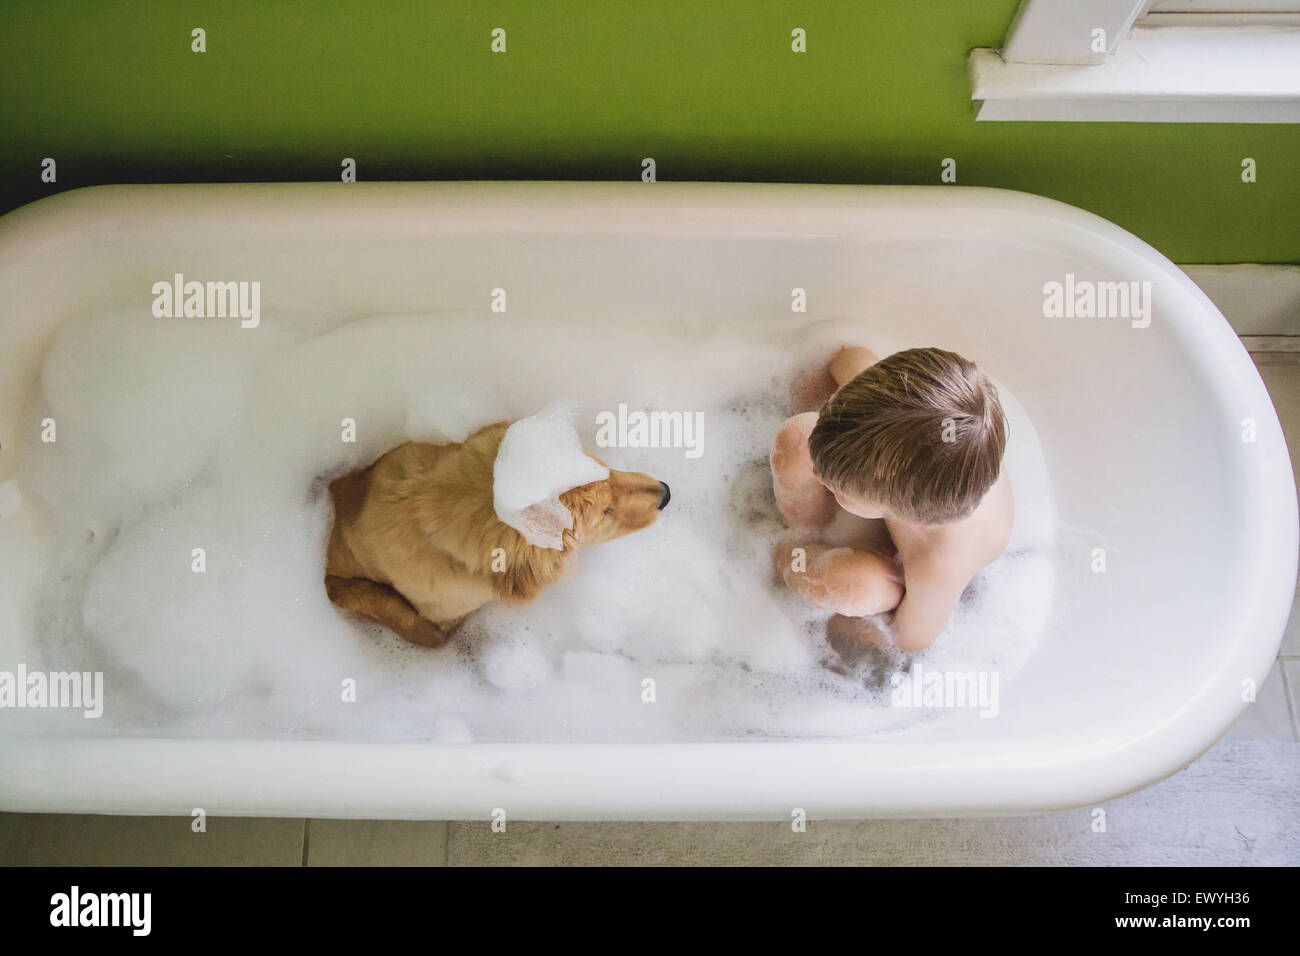 Overhead view of a Boy and his dog sitting in a bathtub Stock Photo